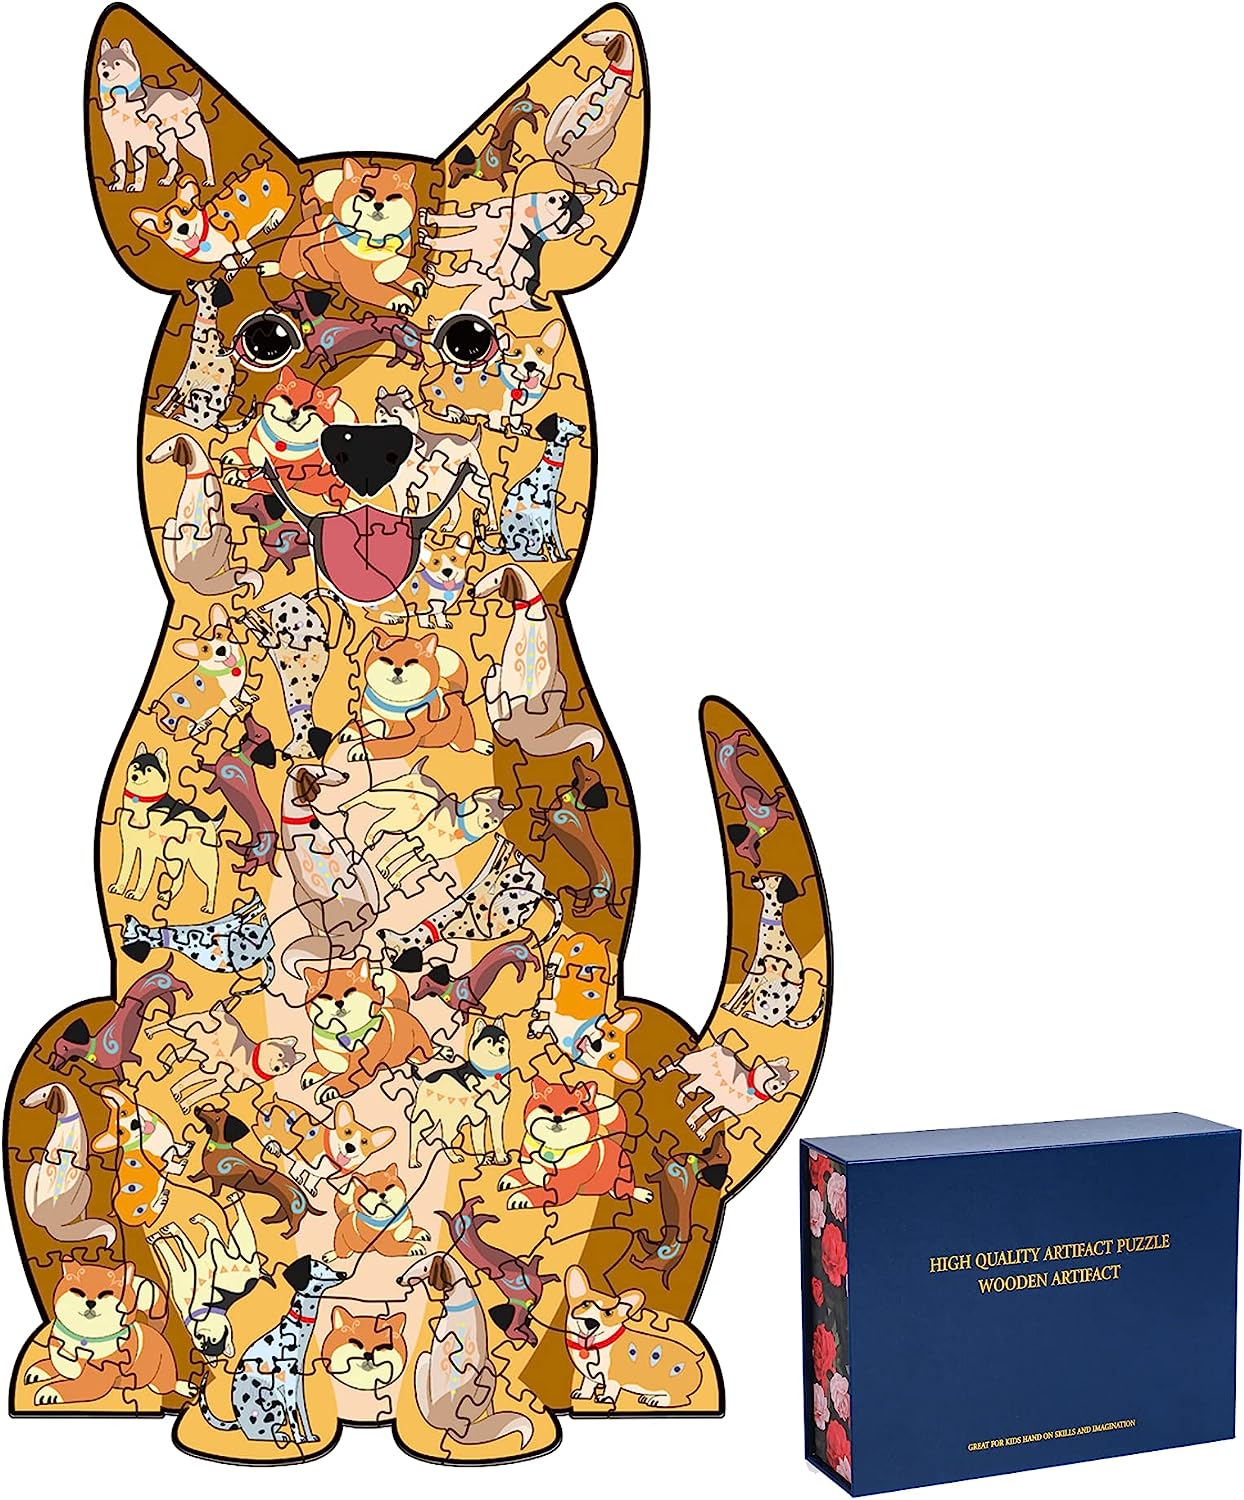 Wooden Jigsaw Puzzles - Comic Dog(100 pcs) Gift Package for Adults and Kids, Unique Animal Shaped Jigsaws, Irregular Wood Cut Puzzle | 6.3"x11" (Small)